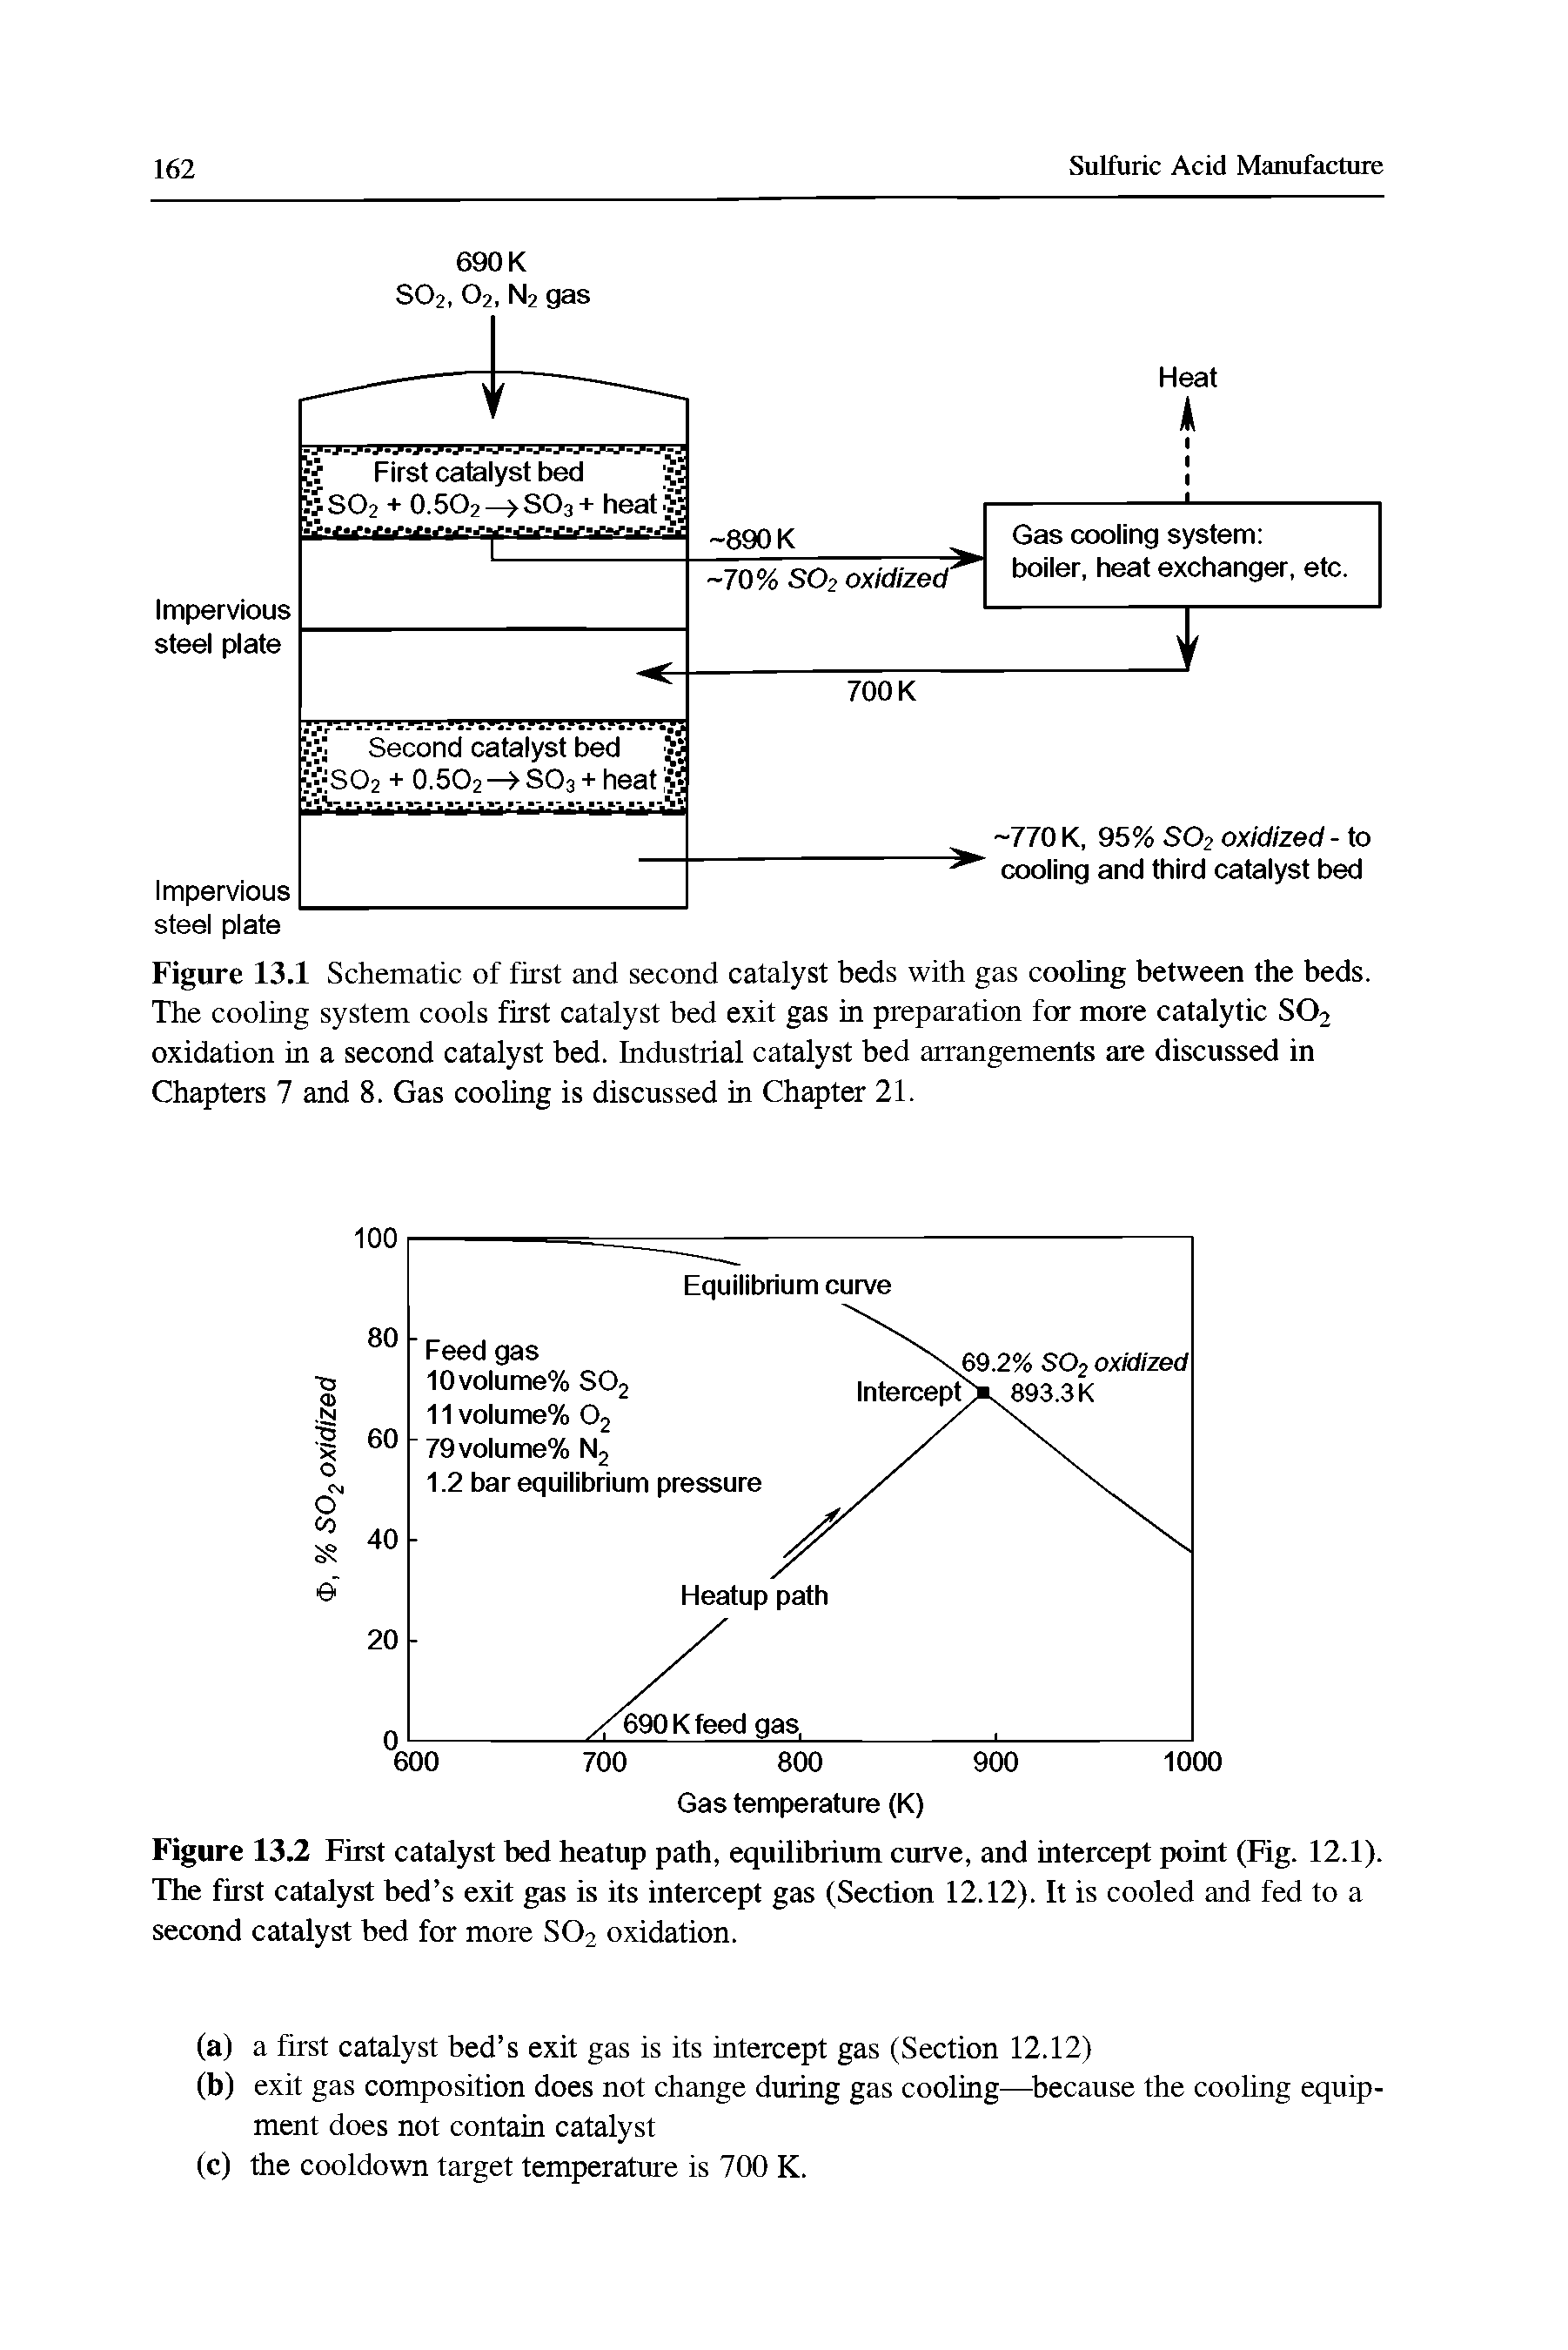 Figure 13.2 First catalyst bed heatup path, equilibrium curve, and intercept point (Fig. 12.1). The first catalyst bed s exit gas is its intercept gas (Section 12.12). It is cooled and fed to a second catalyst bed for more SO2 oxidation.